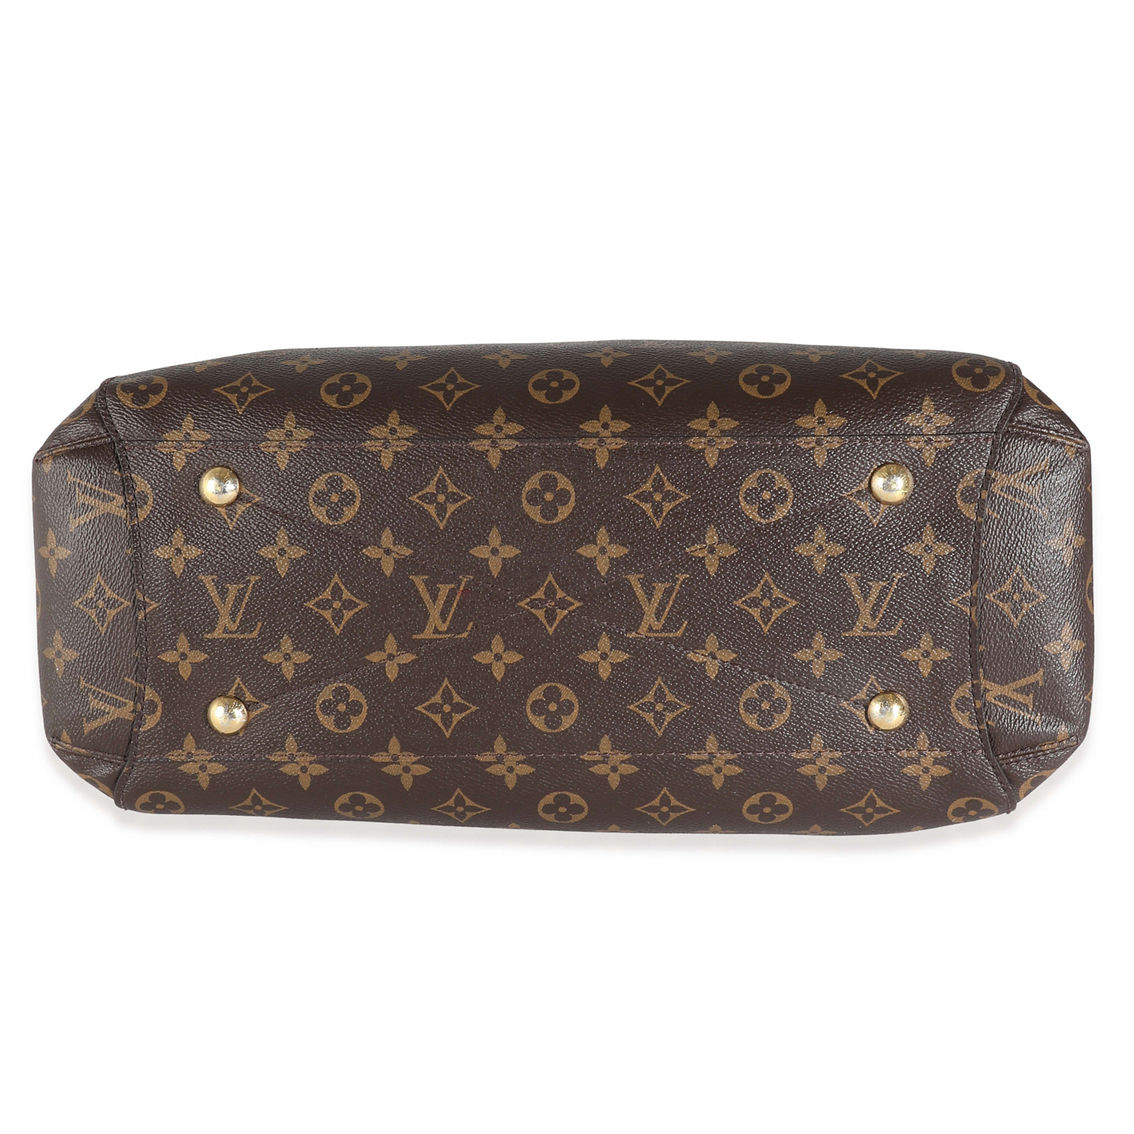 Louis Vuitton Montaigne GM Pre-Owned - Image 4 of 5